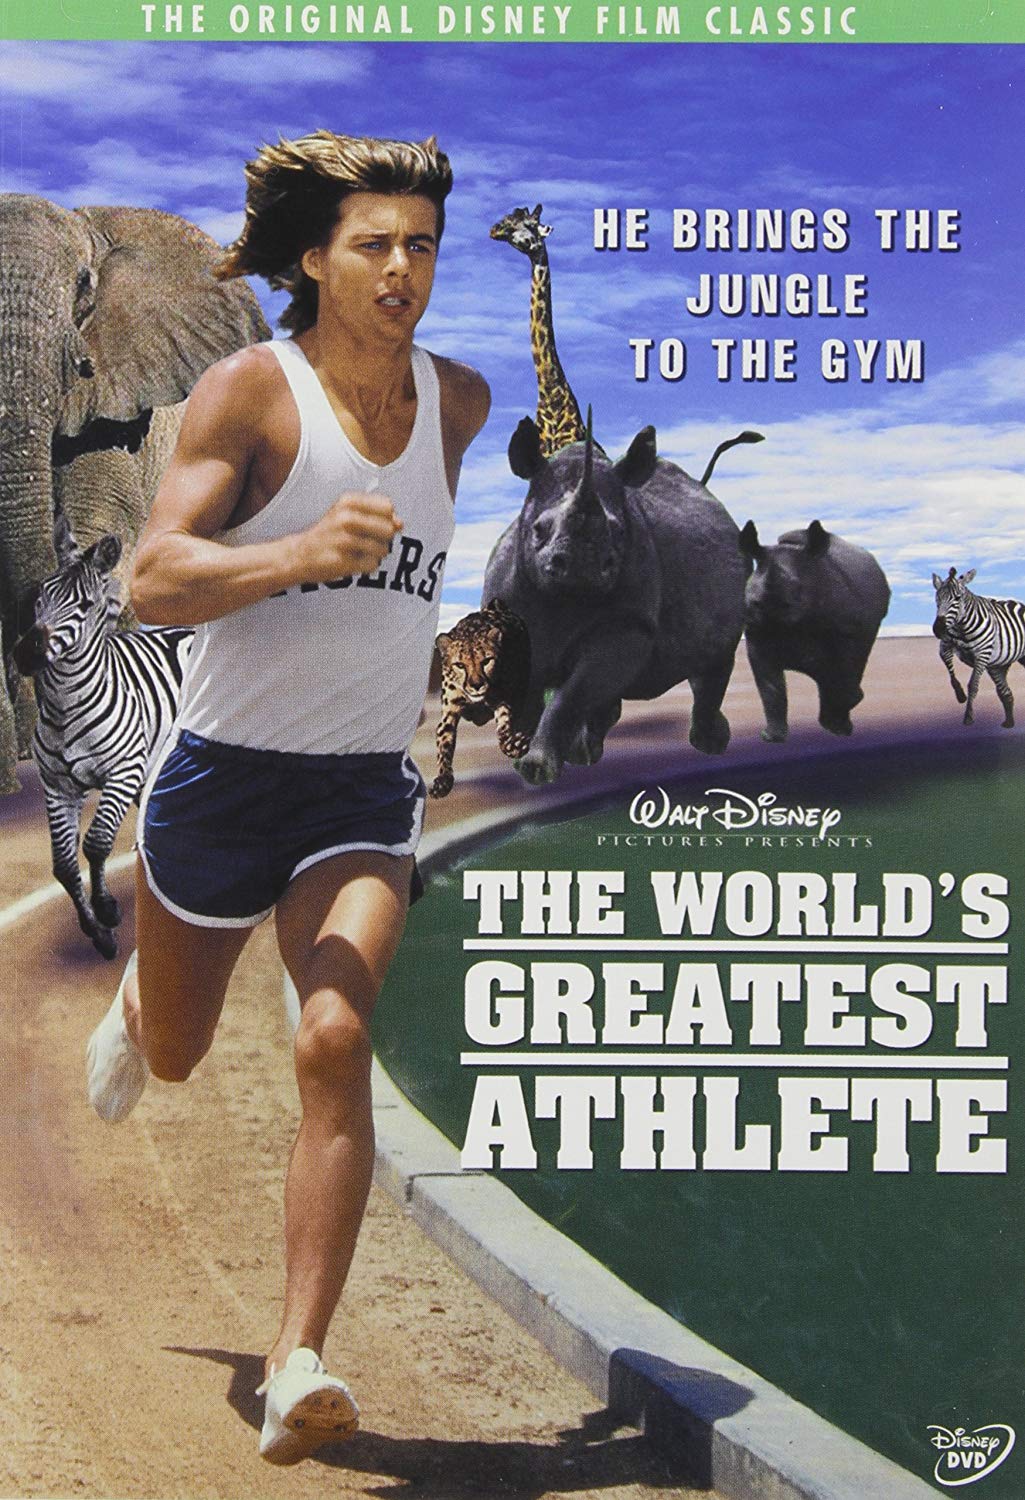 Cover of the 1973 Walt Disney comedy, The World's Greatest Athlete, with Nanu (Jan-Michael Vincent) running in a track uniform, with several of his jungle animal friends chasing him